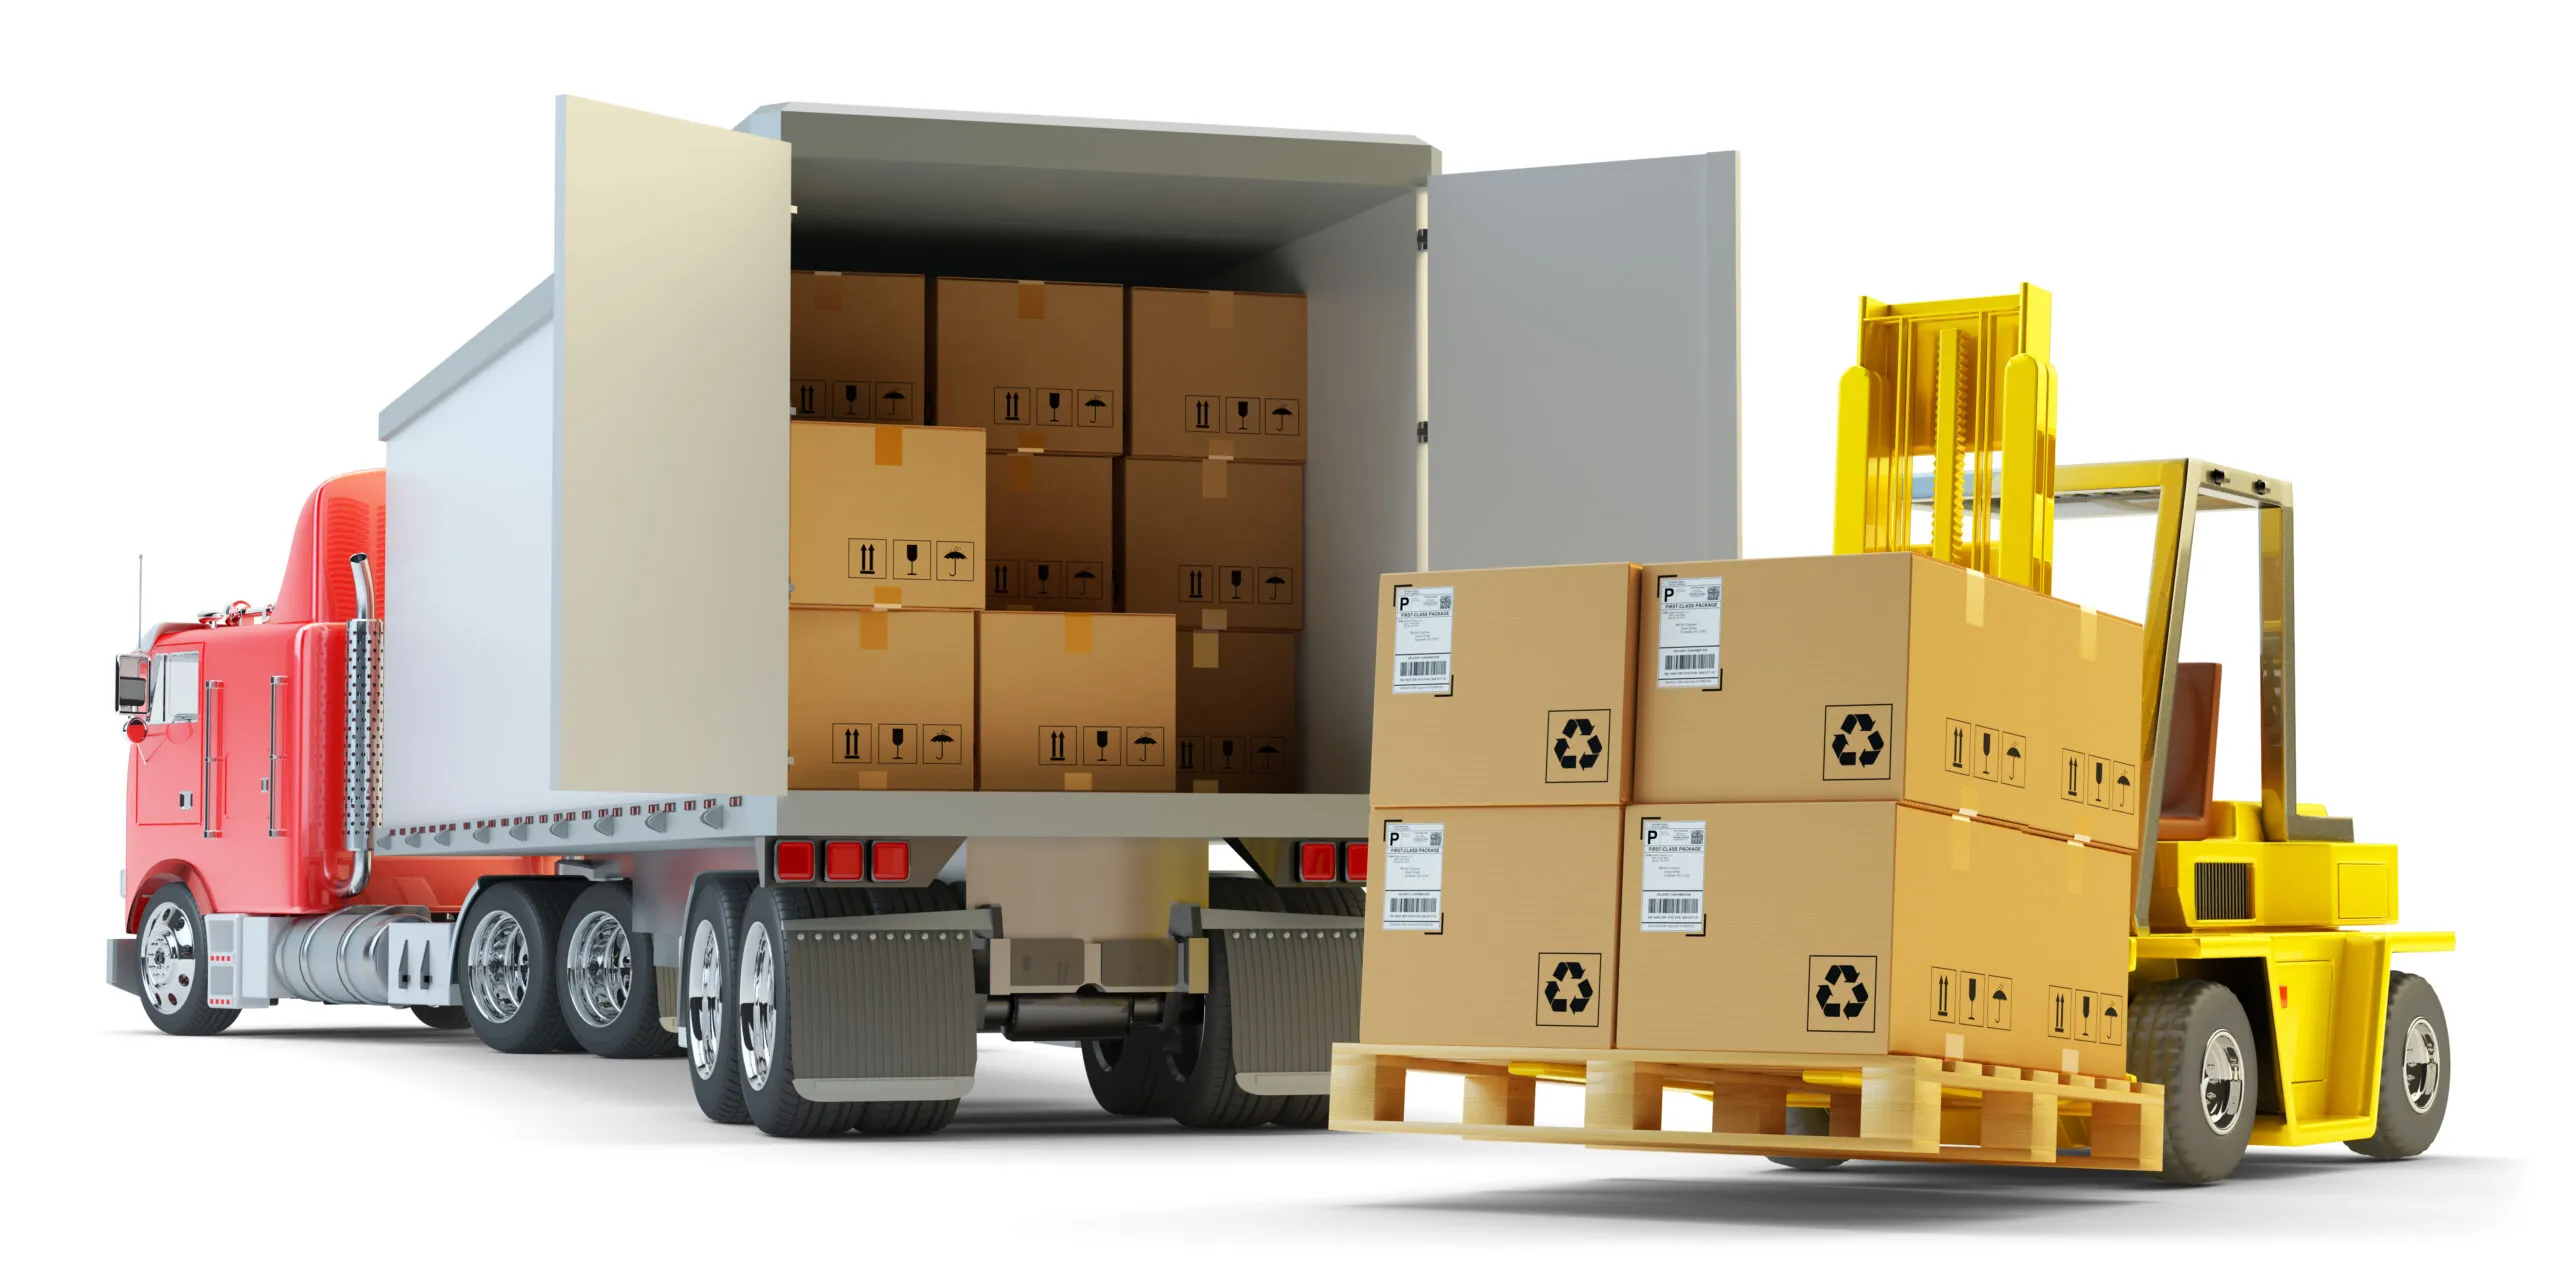 Shipping Hardwood Floors - Yellow forklift loading boxes of flooring onto red freight truck